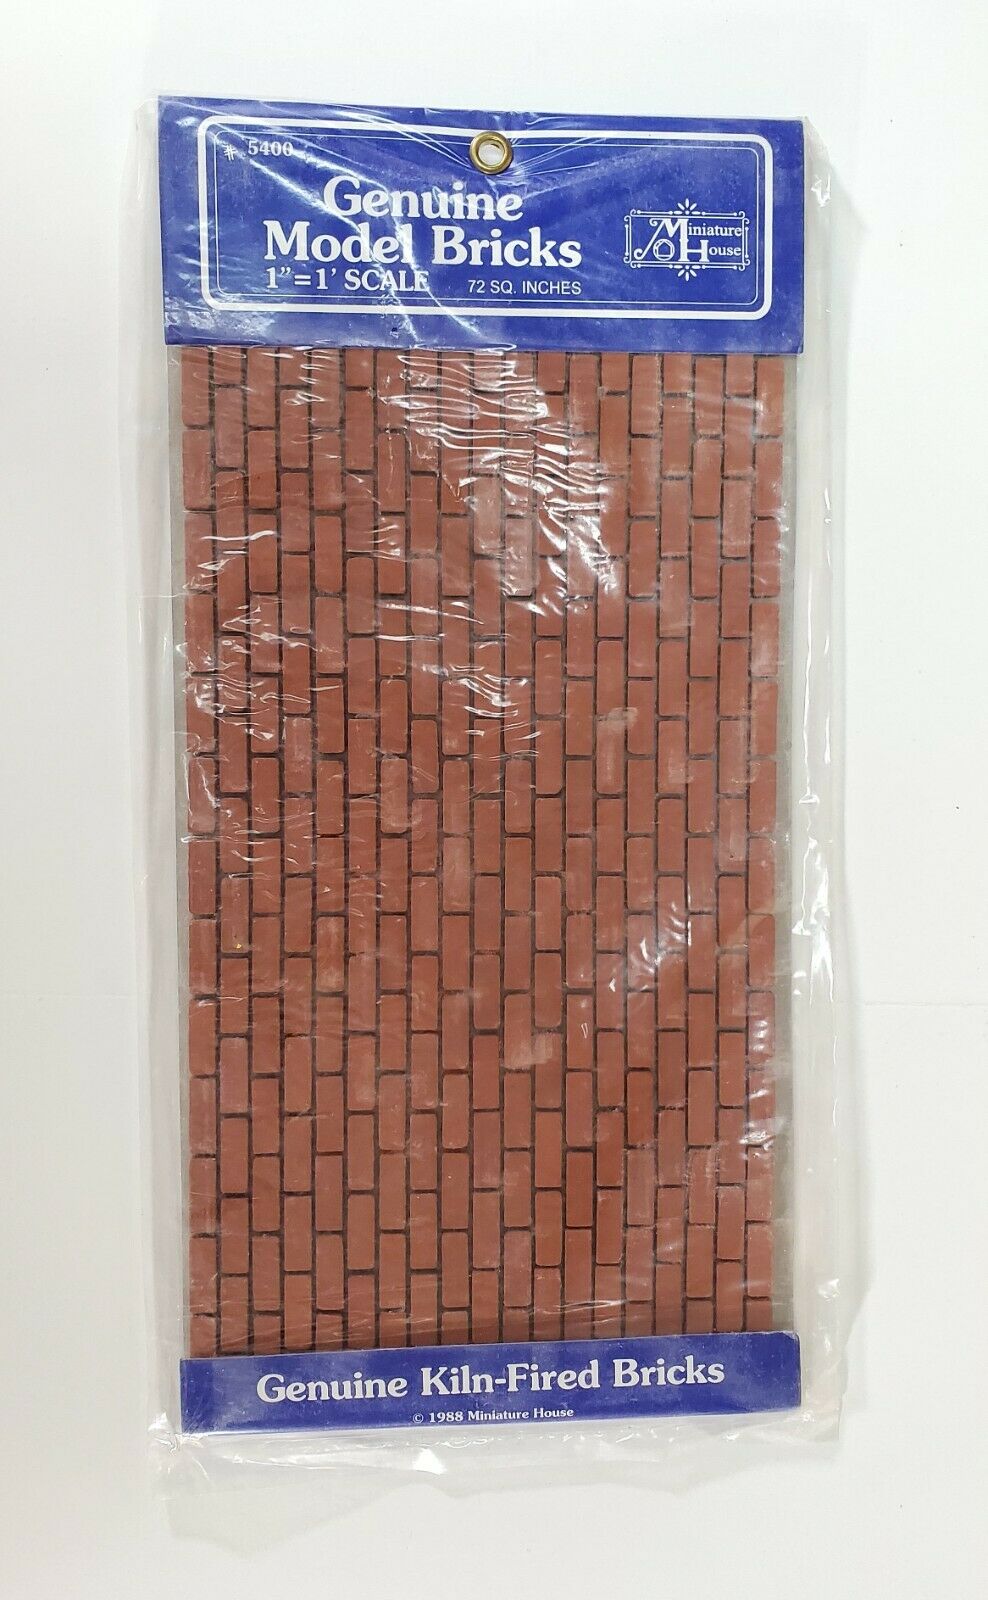 Miniature Red Bricks Kiln Fired Clay 285 Pieces 1:12 Scale Covers 72 sq inches